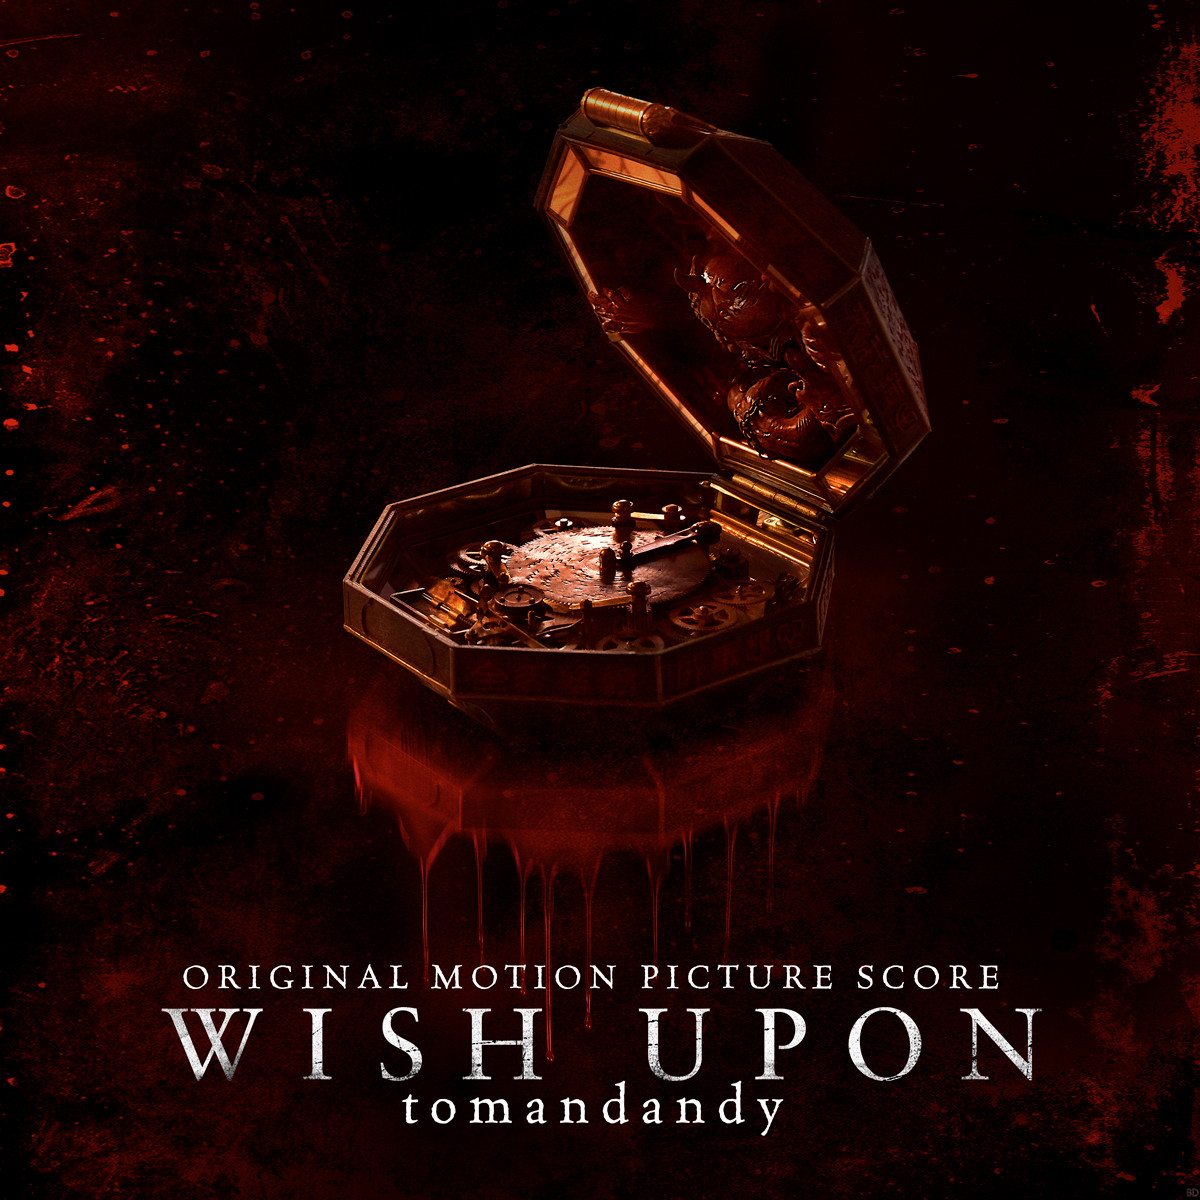 Exclusive] Listen to "Investigate" by tomandandy From the 'Wish Upon'  Soundtrack - Bloody Disgusting